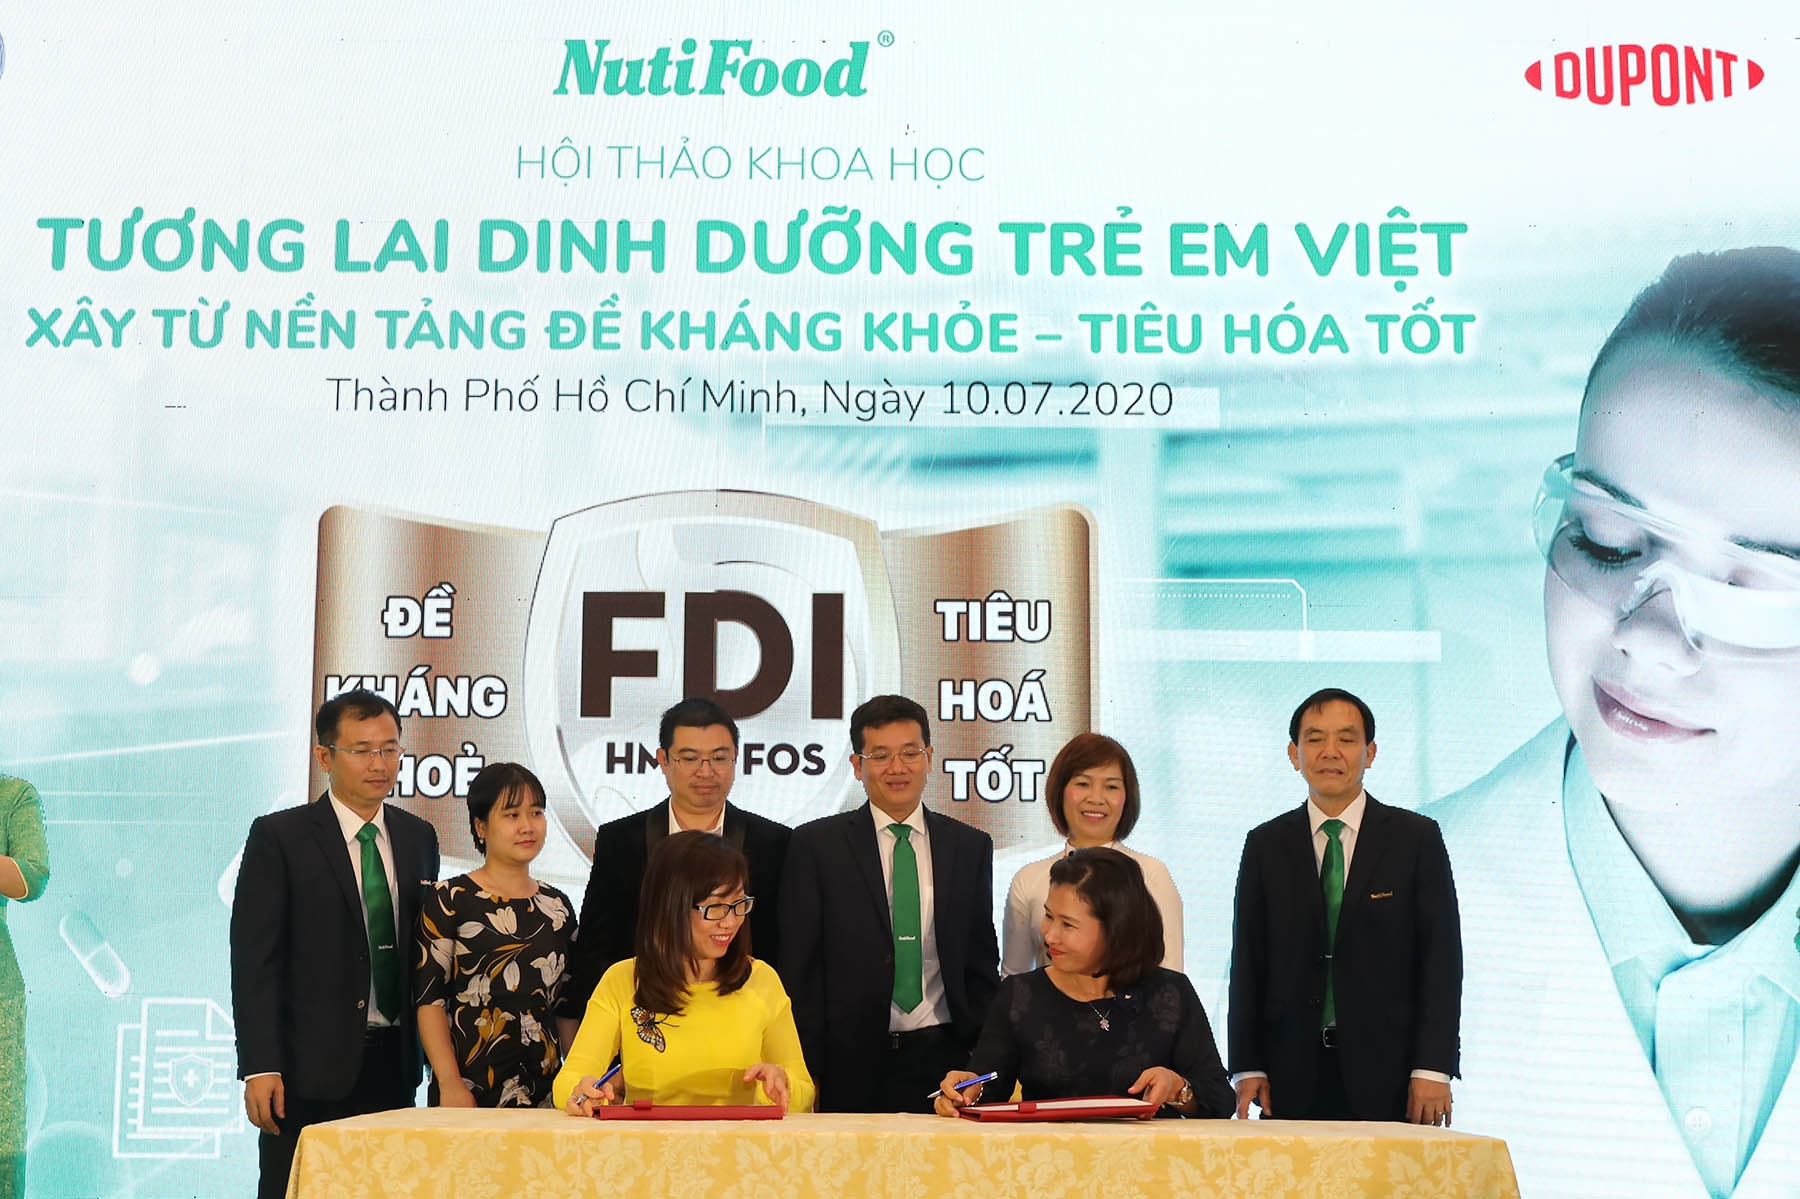 NutiFood partners up with DuPont Group from US